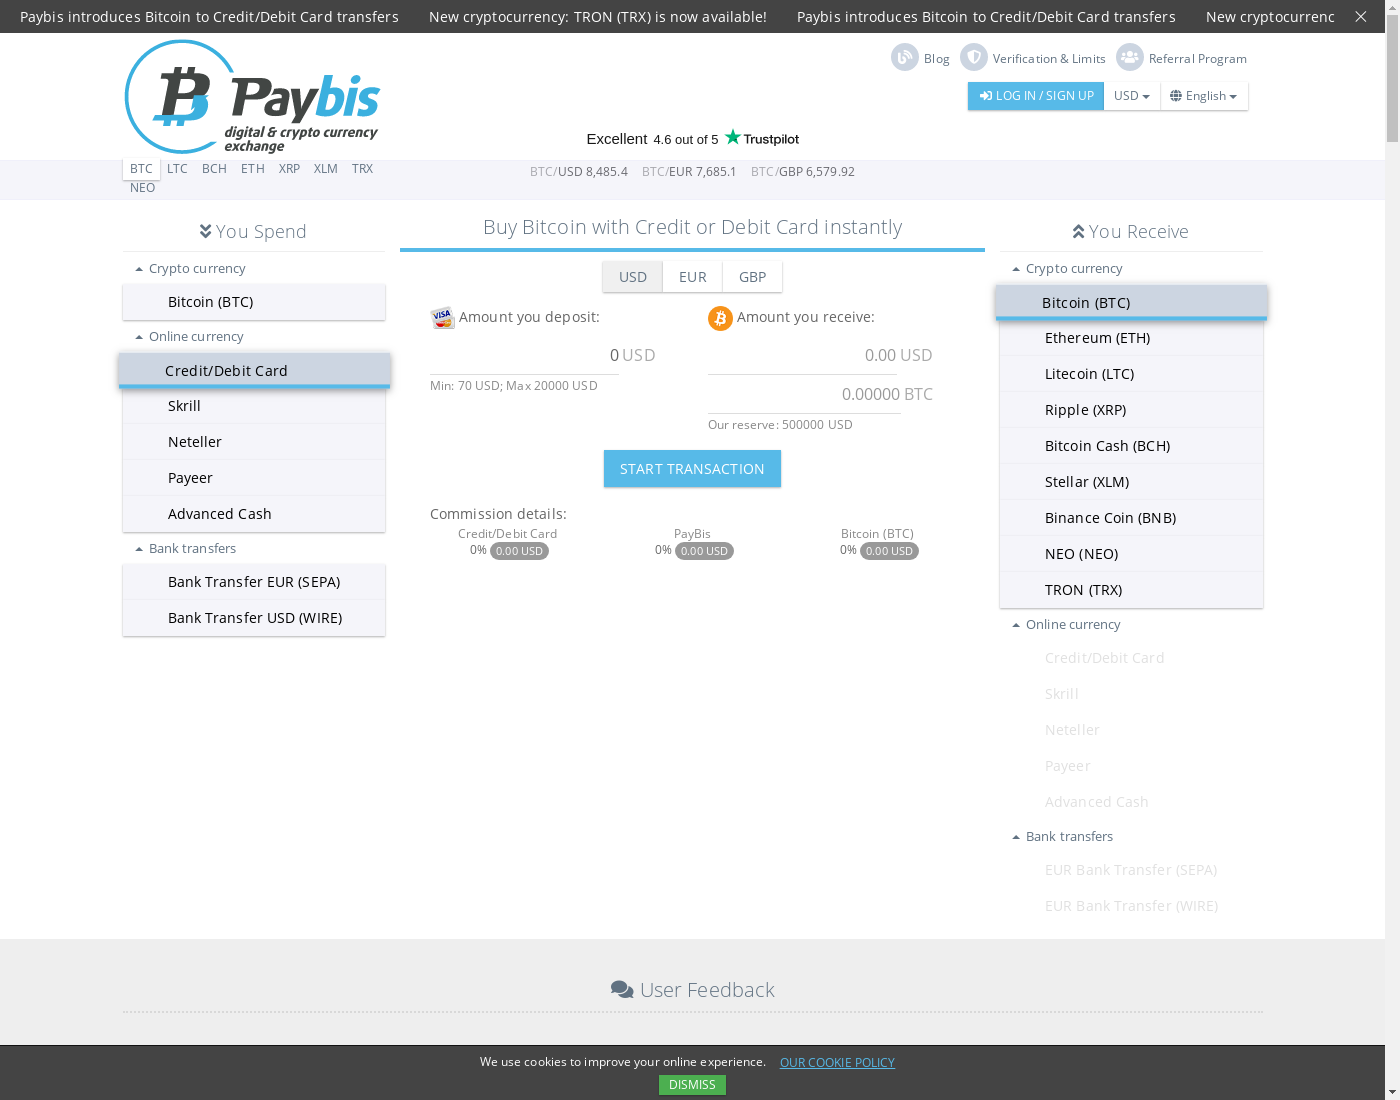 PayBis user interface: the home page in English